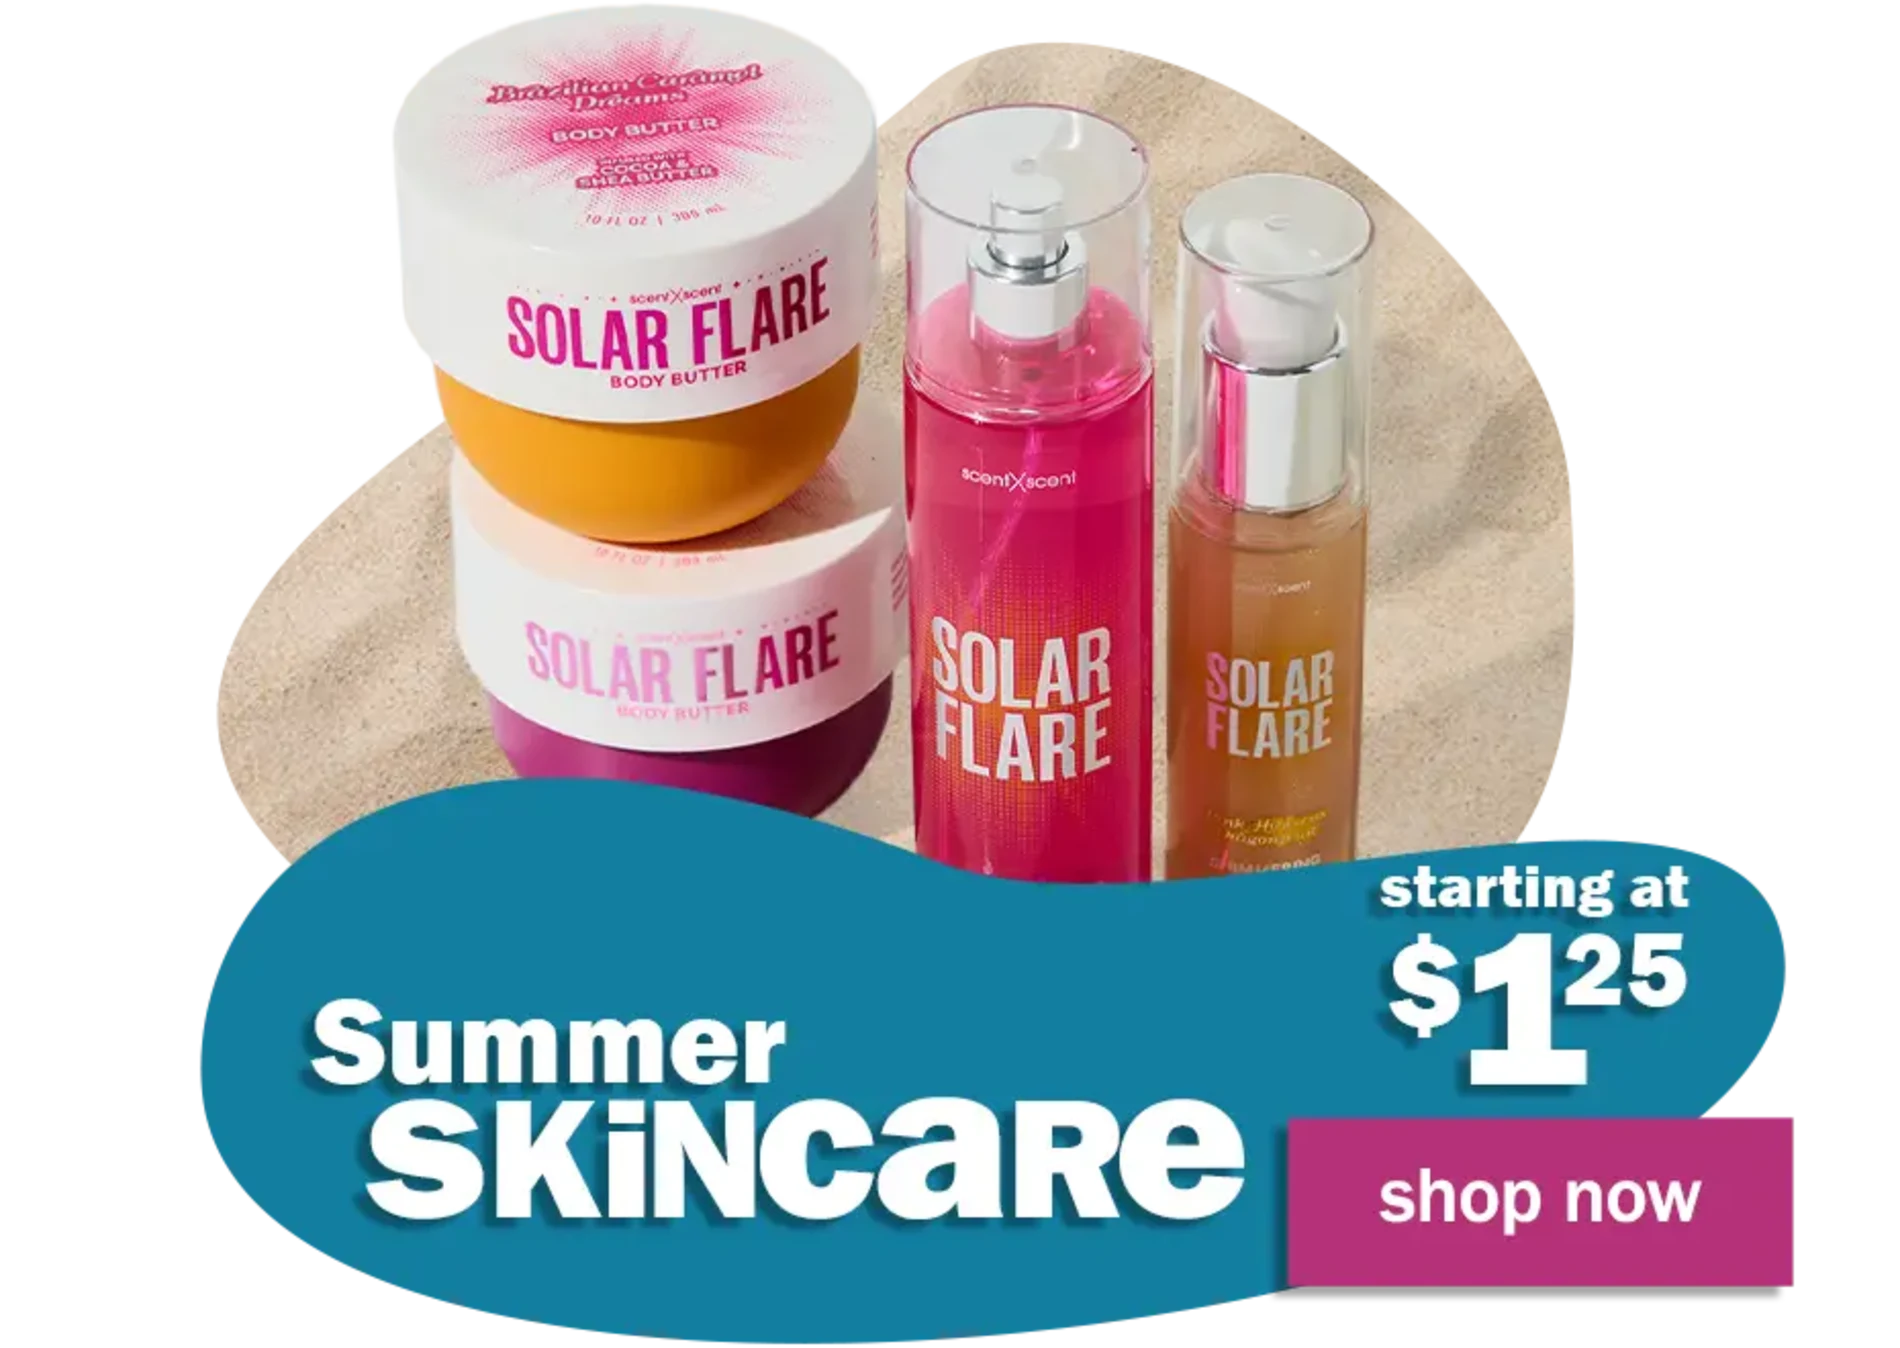 Summer Skincare. Starting at $1.25. Shop Now.